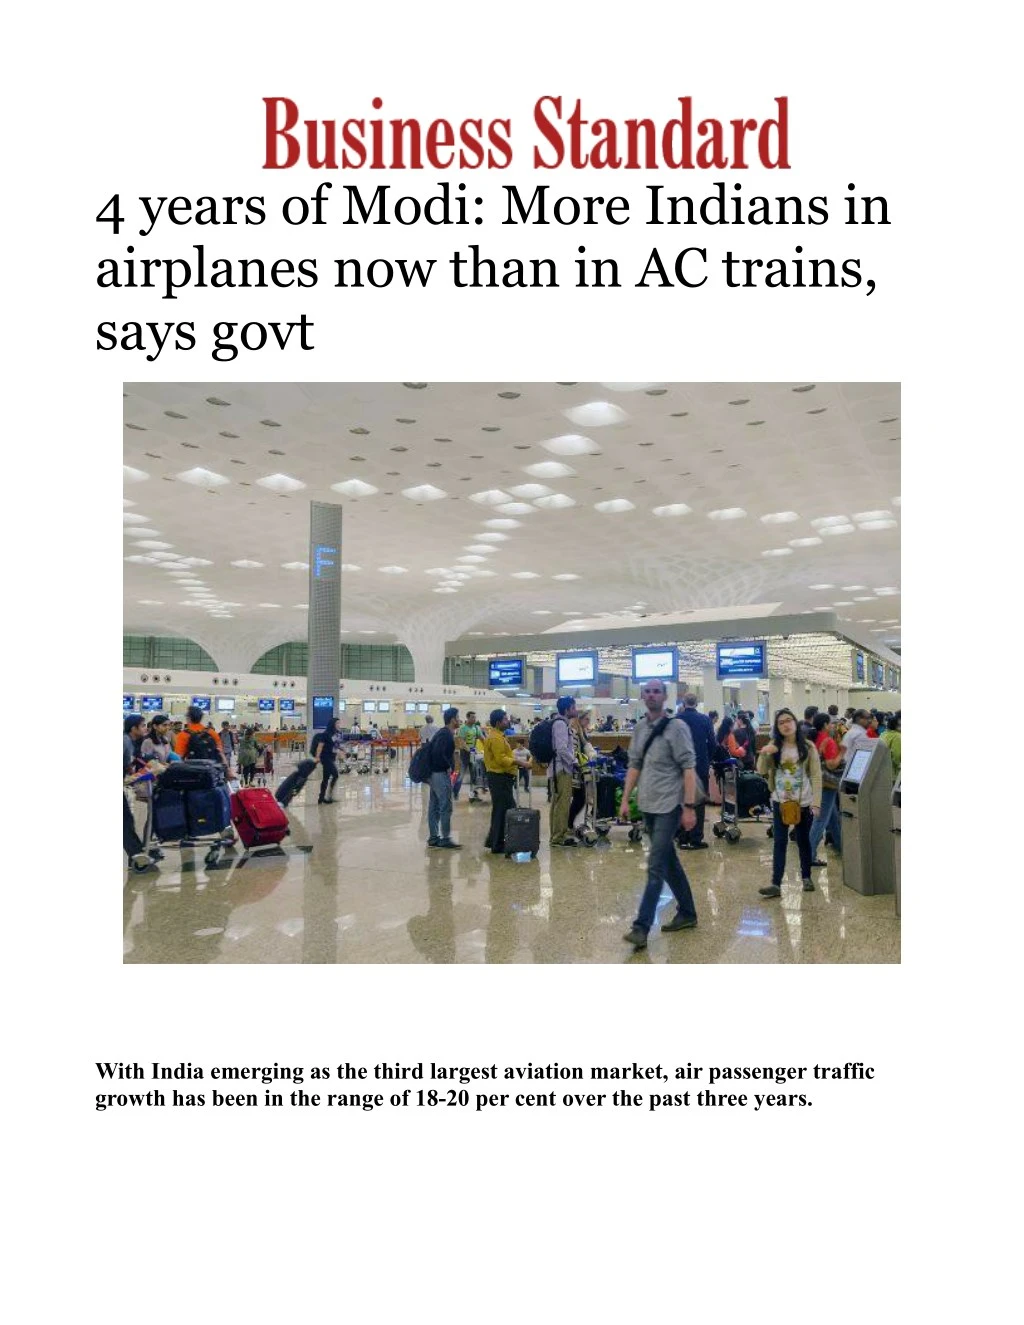 4 years of modi more indians in airplanes